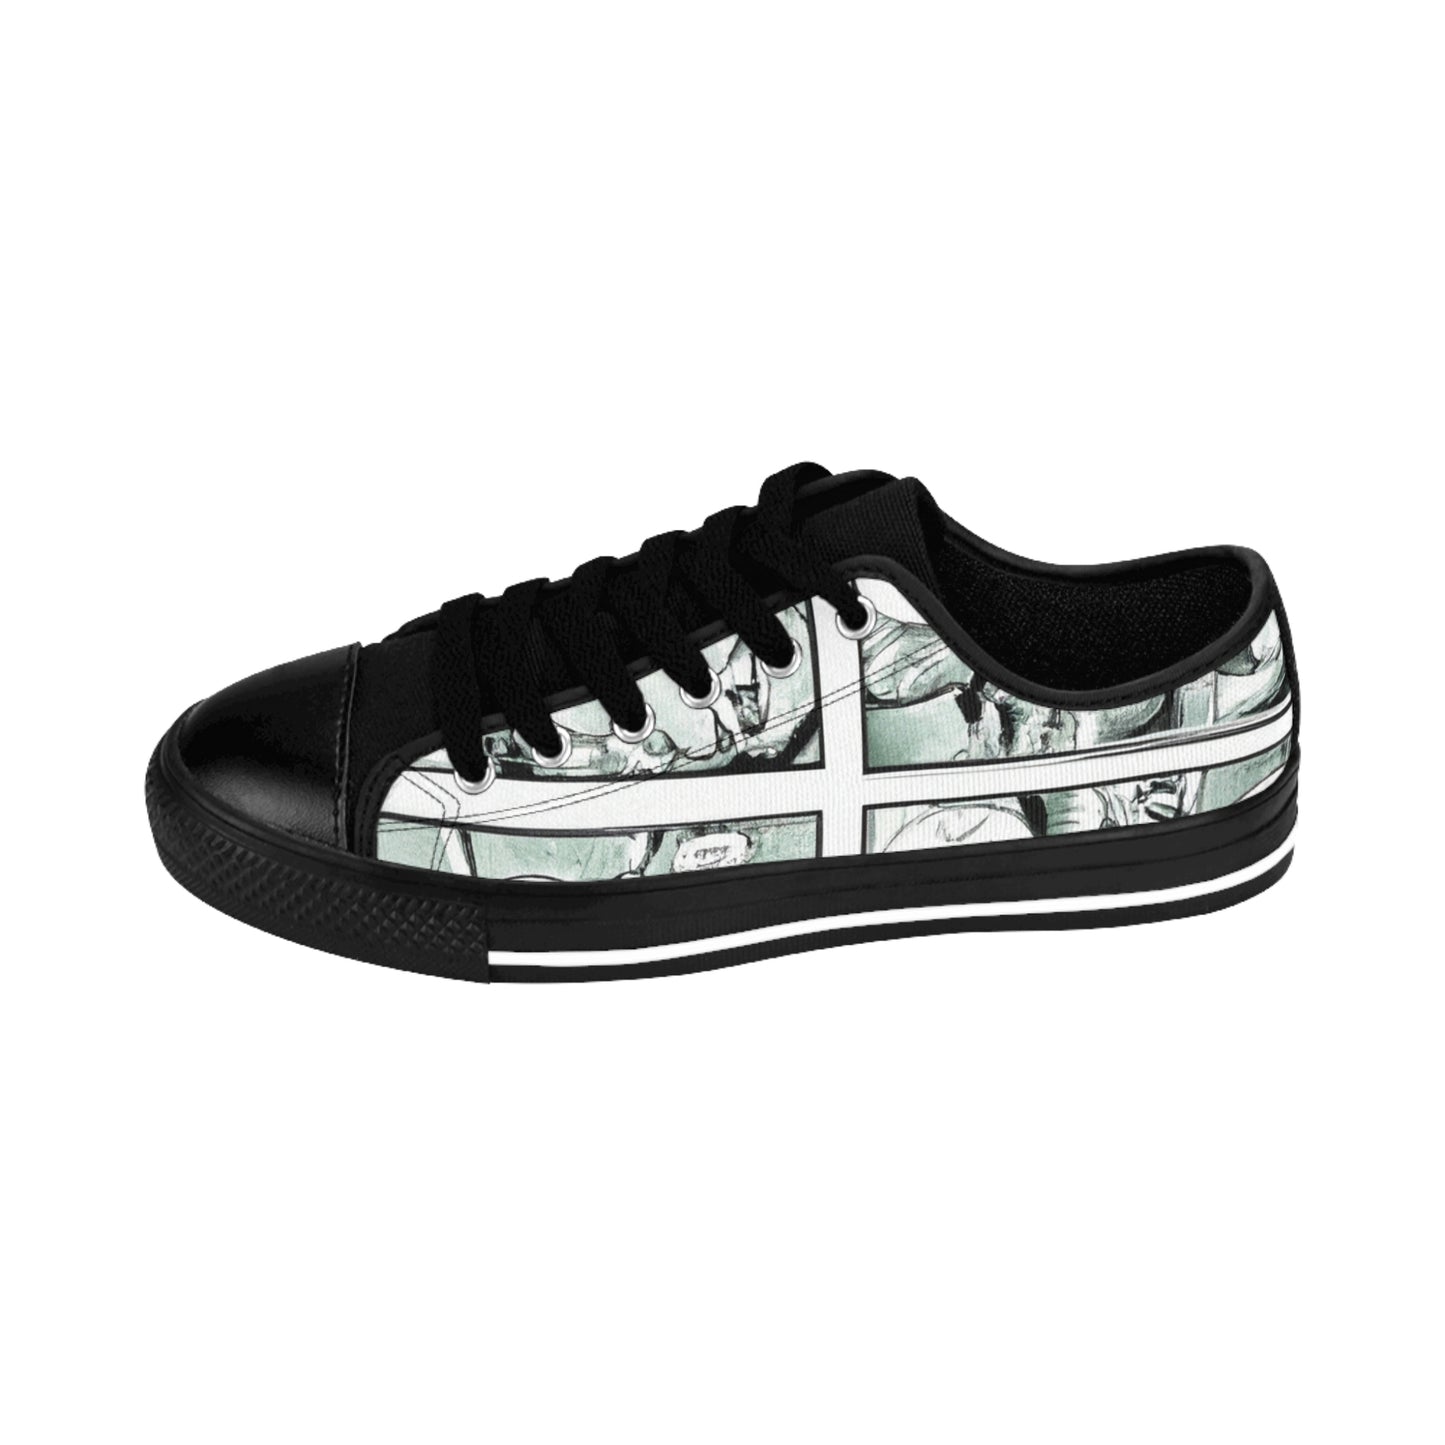 Sir Fionna of Shoeford - Comic Book Low Top